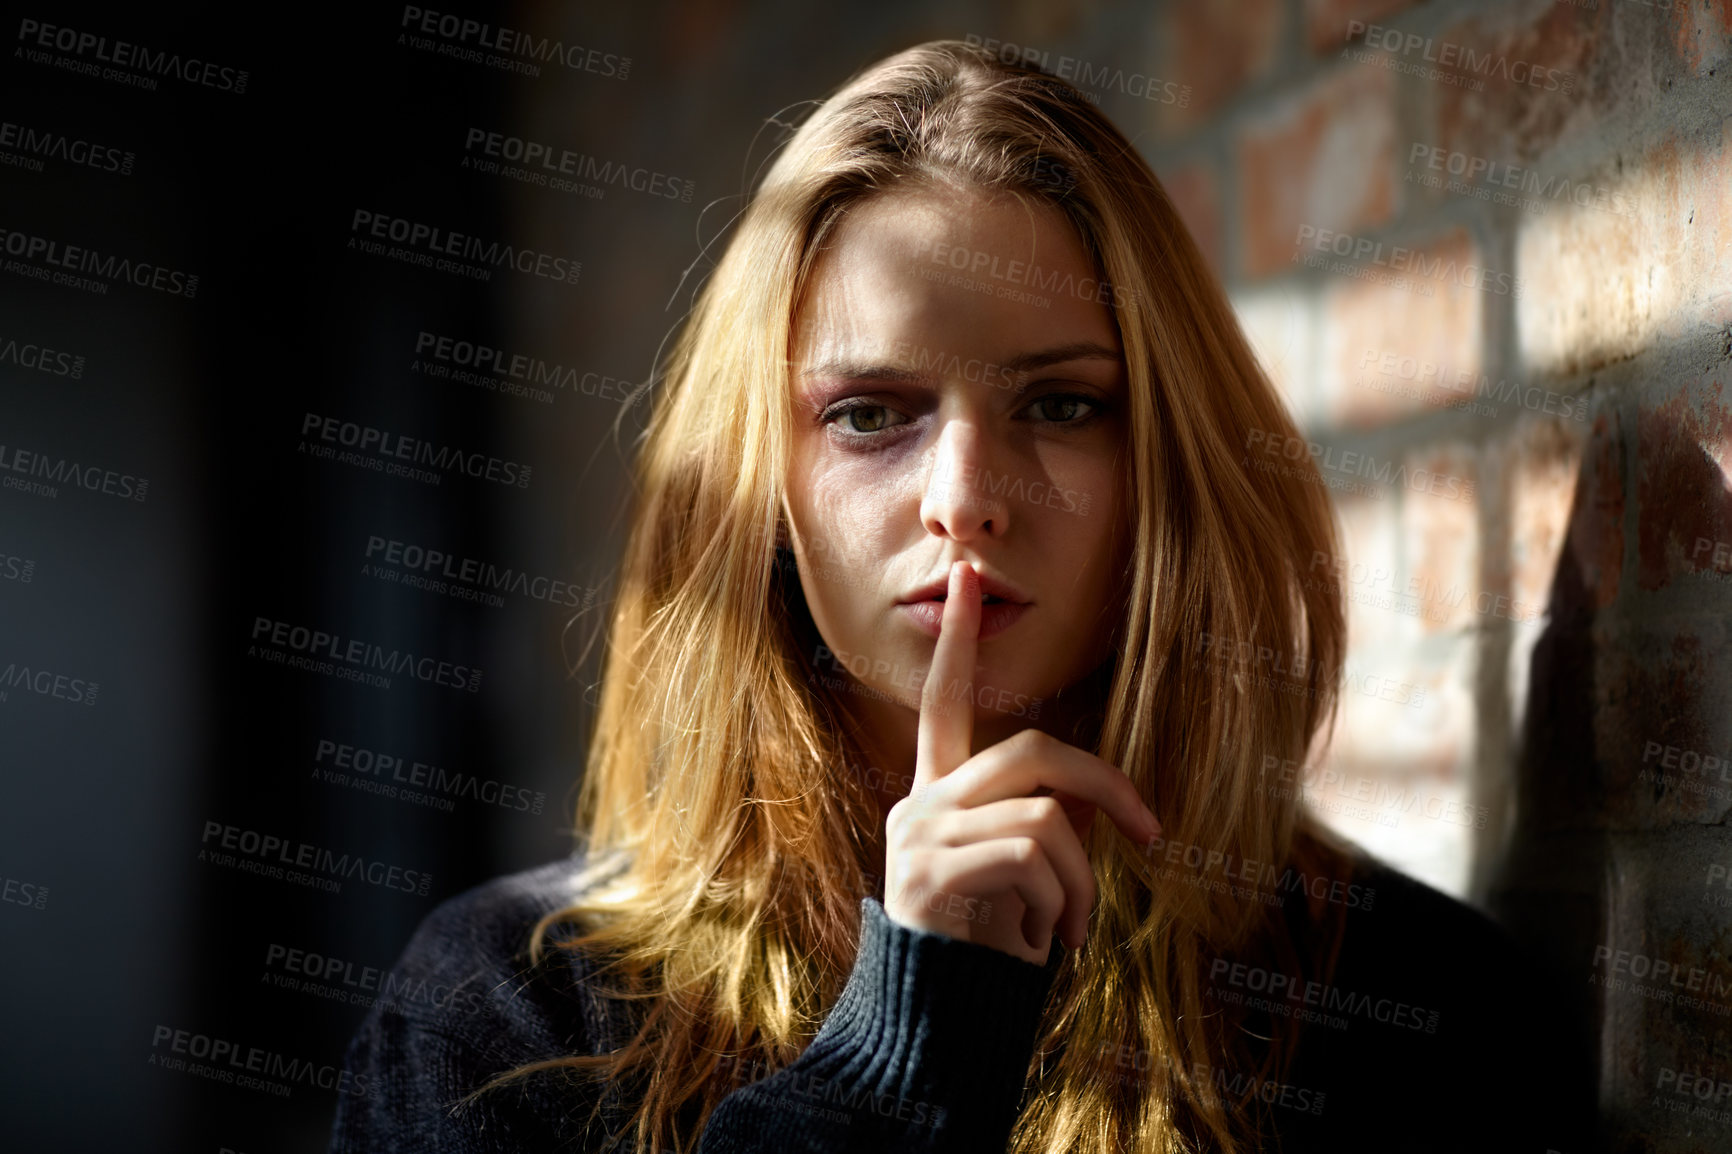 Buy stock photo Abused young woman making a silence gesture while looking at the camera